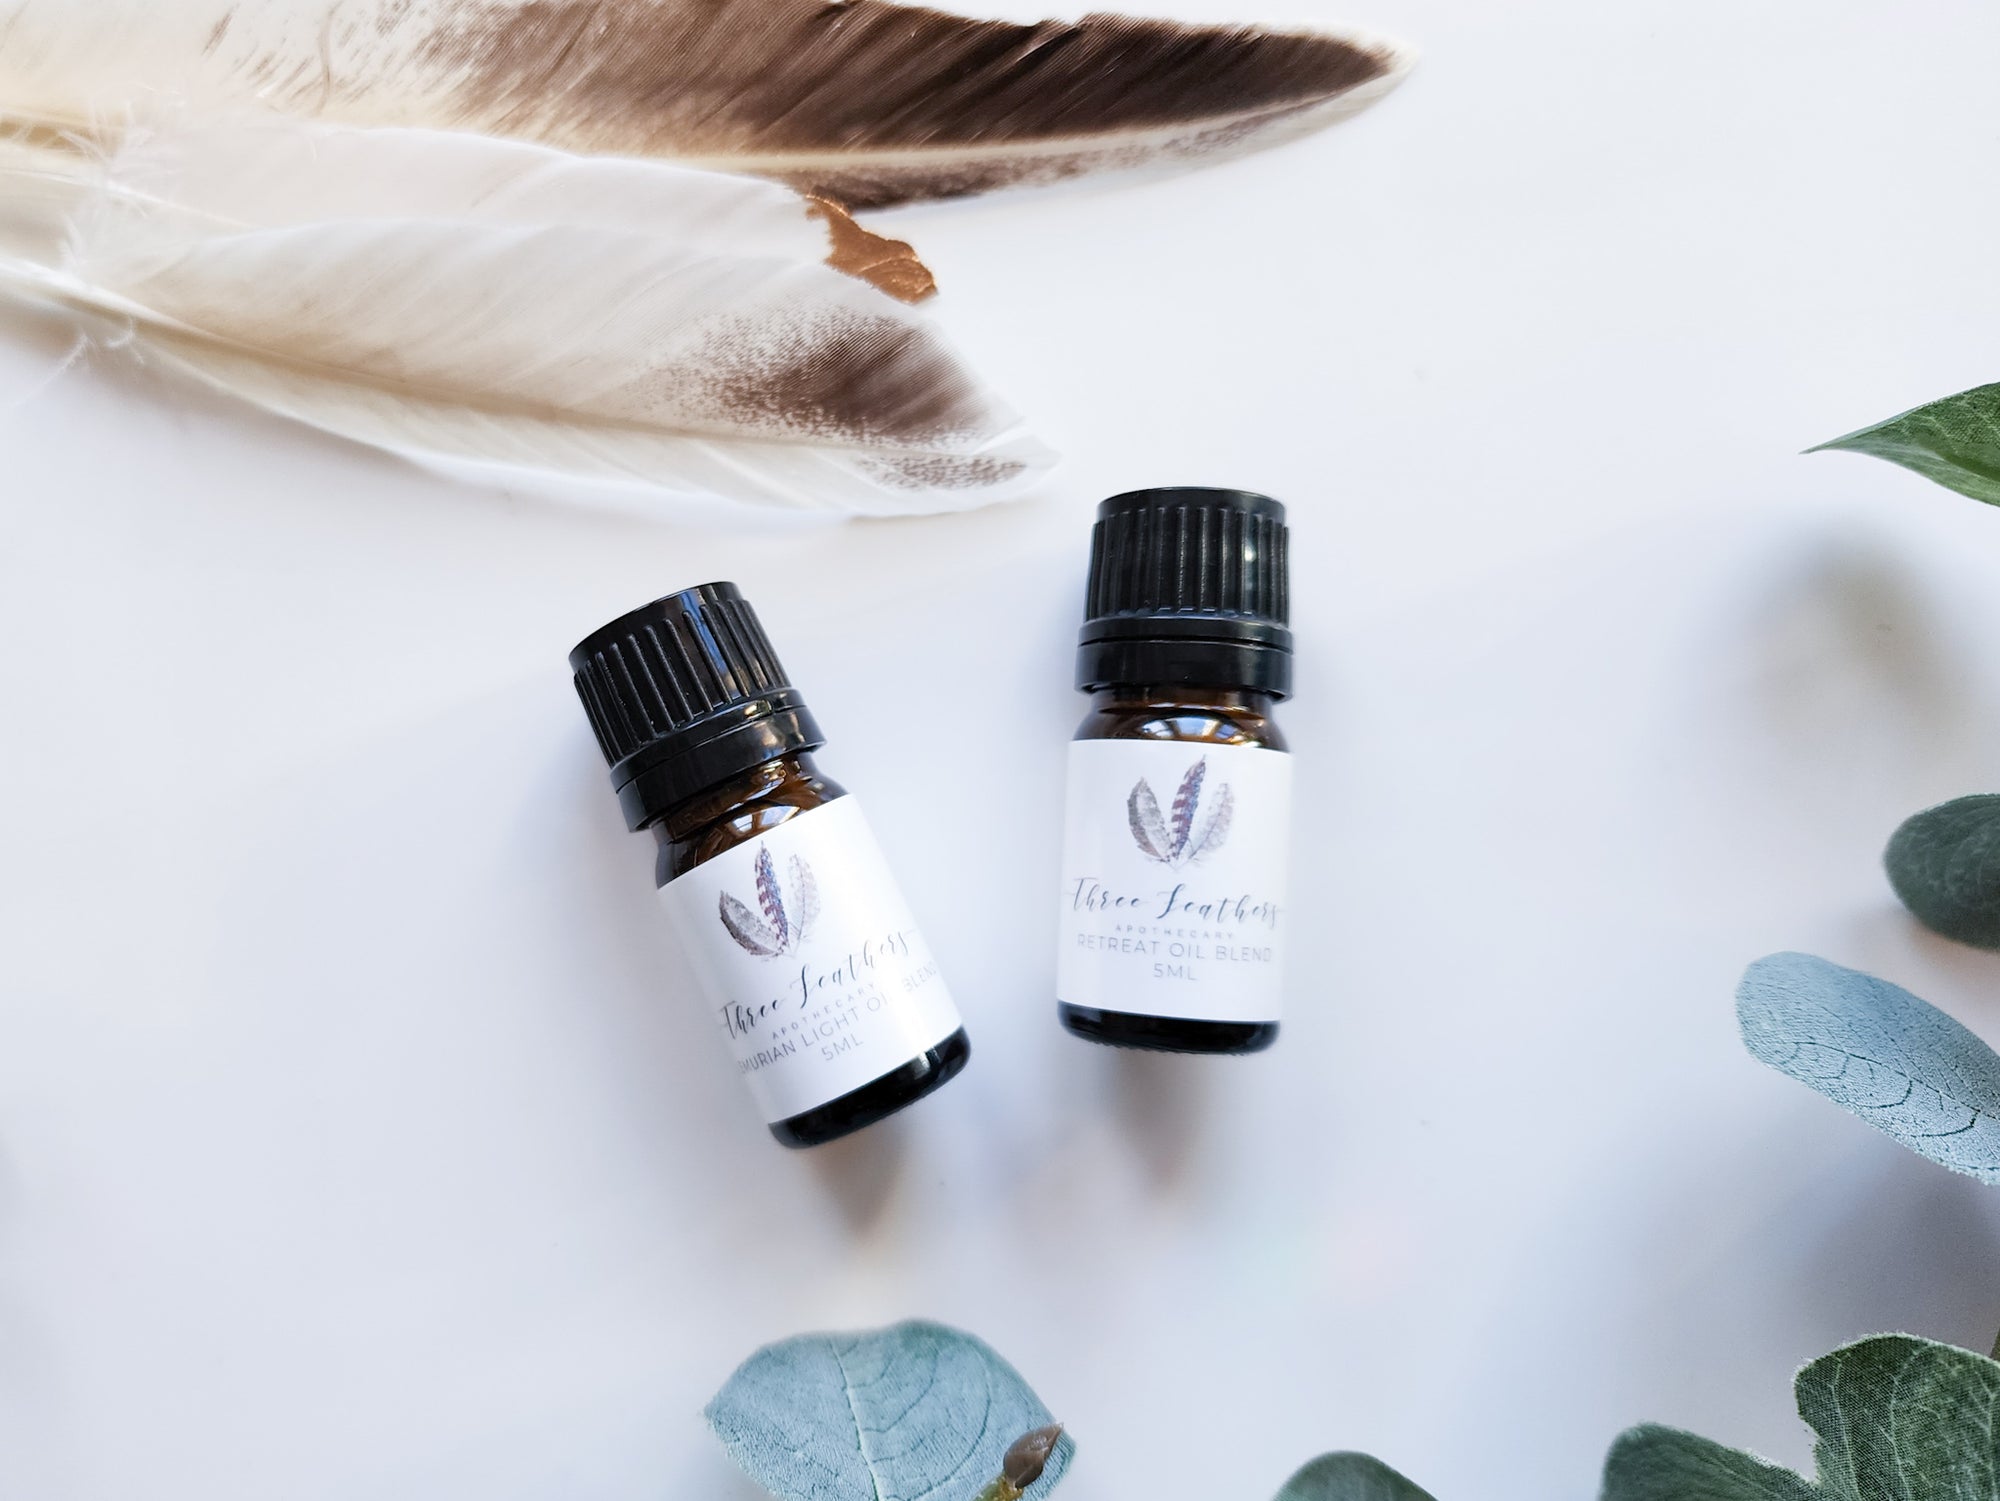 Retreat Oil Blend 5ml|| Three Feathers Apothecary